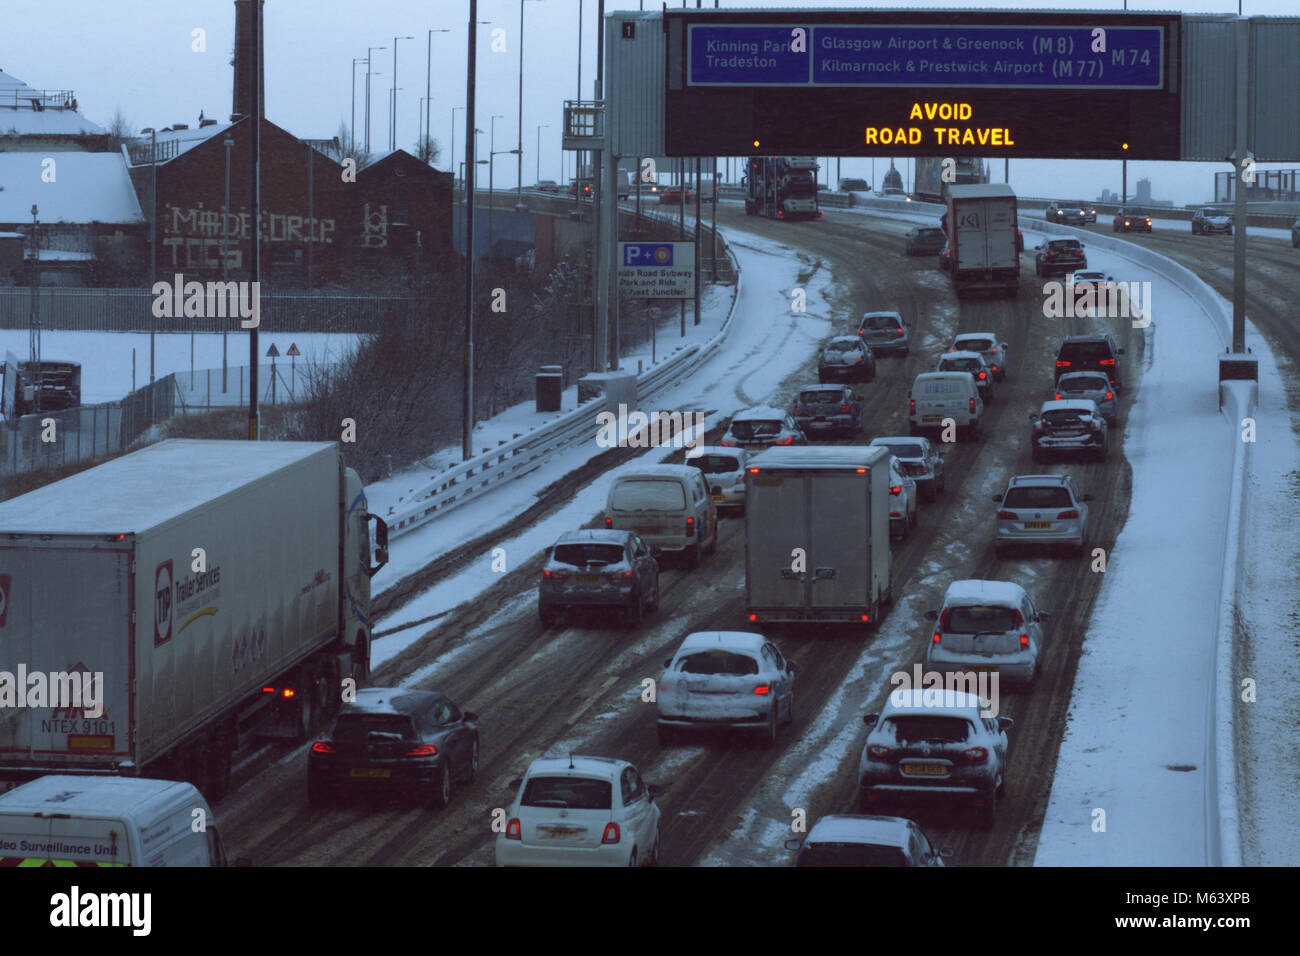 Glasgow, UK. 28th Feb, 2018. Blizzard conditions cause hazardous driving conditions on the M74, bringing traffic to a near standstill. A red weather warning is in place across central Scotland until 10.00am. Credit: Alan Paterson/Alamy Live News Stock Photo